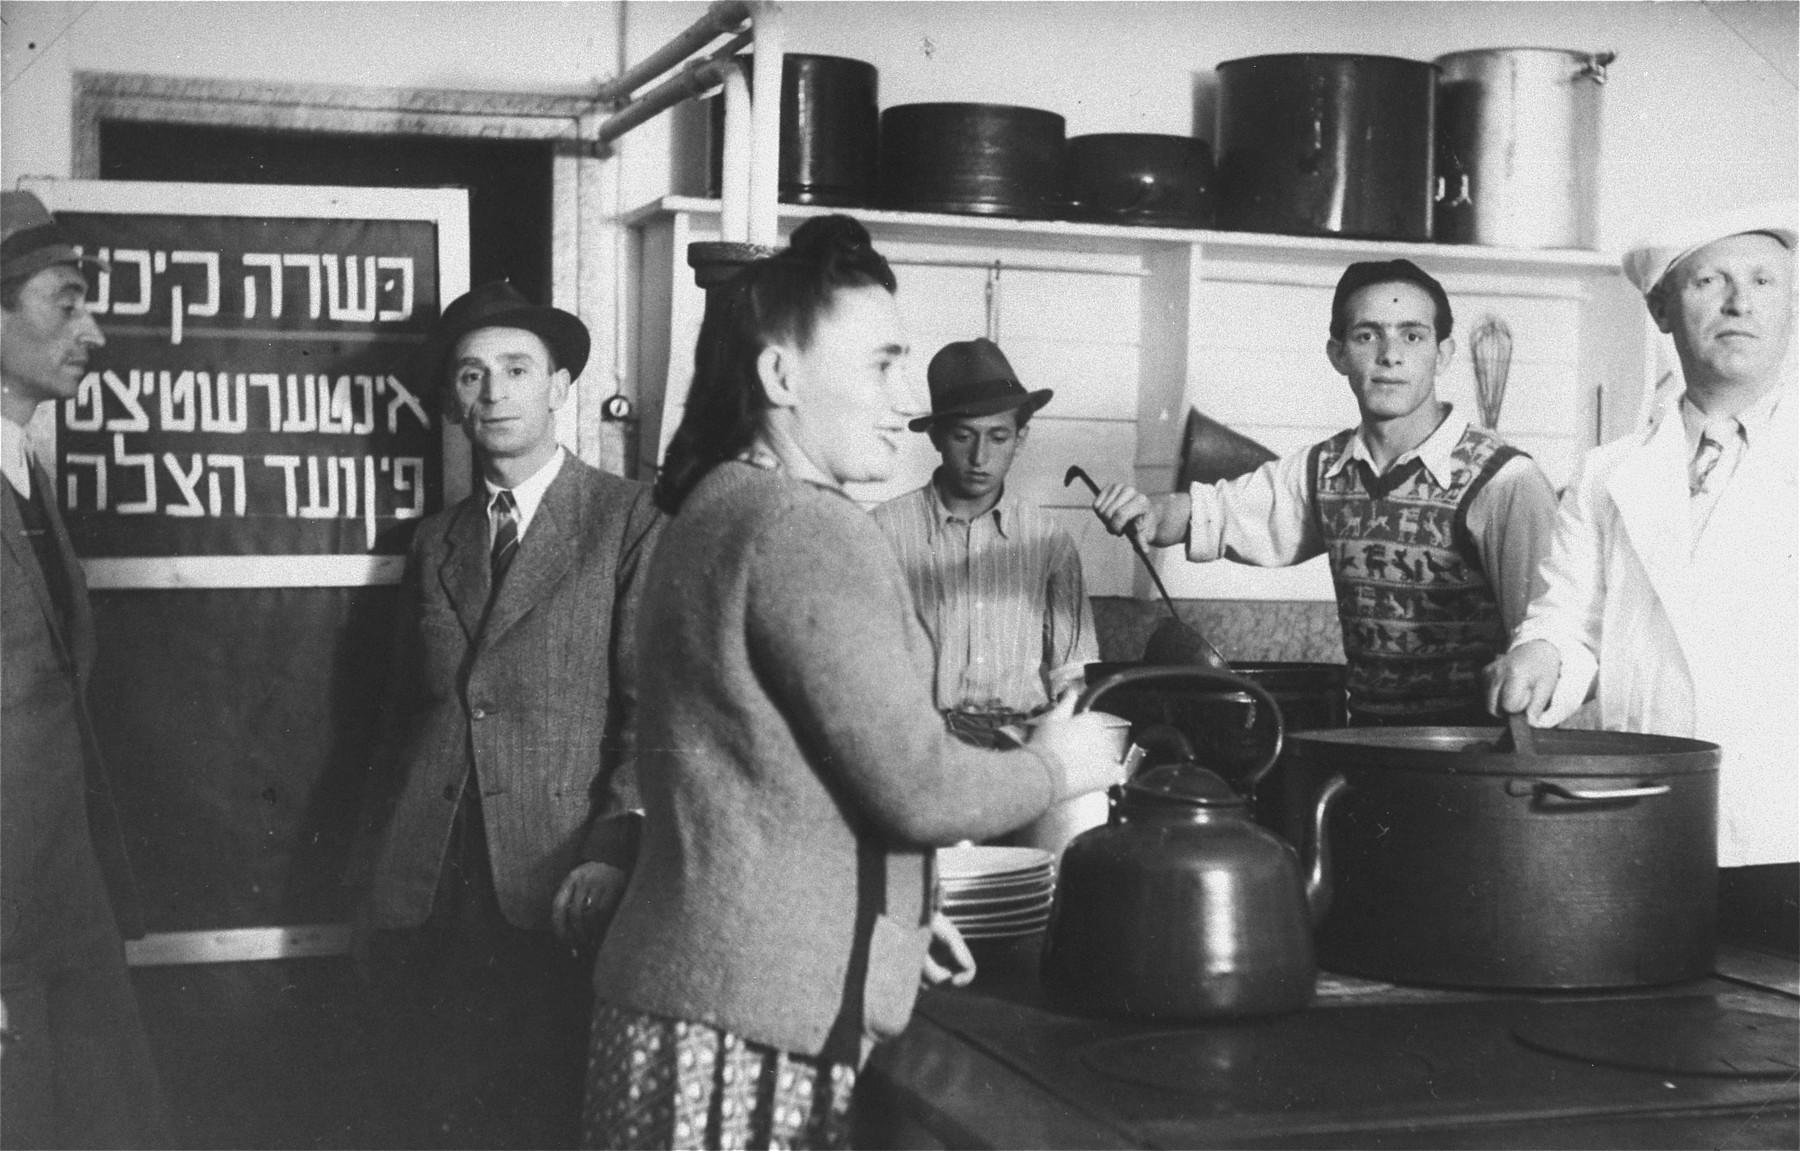 Jewish DPs at work in the kosher kitchen at the Mittenwald displaced persons camp.  

The Yiddish sign on the door reads: "Kosher kitchen, underwritten by the Vaad Hatzala [Rescue Committee].